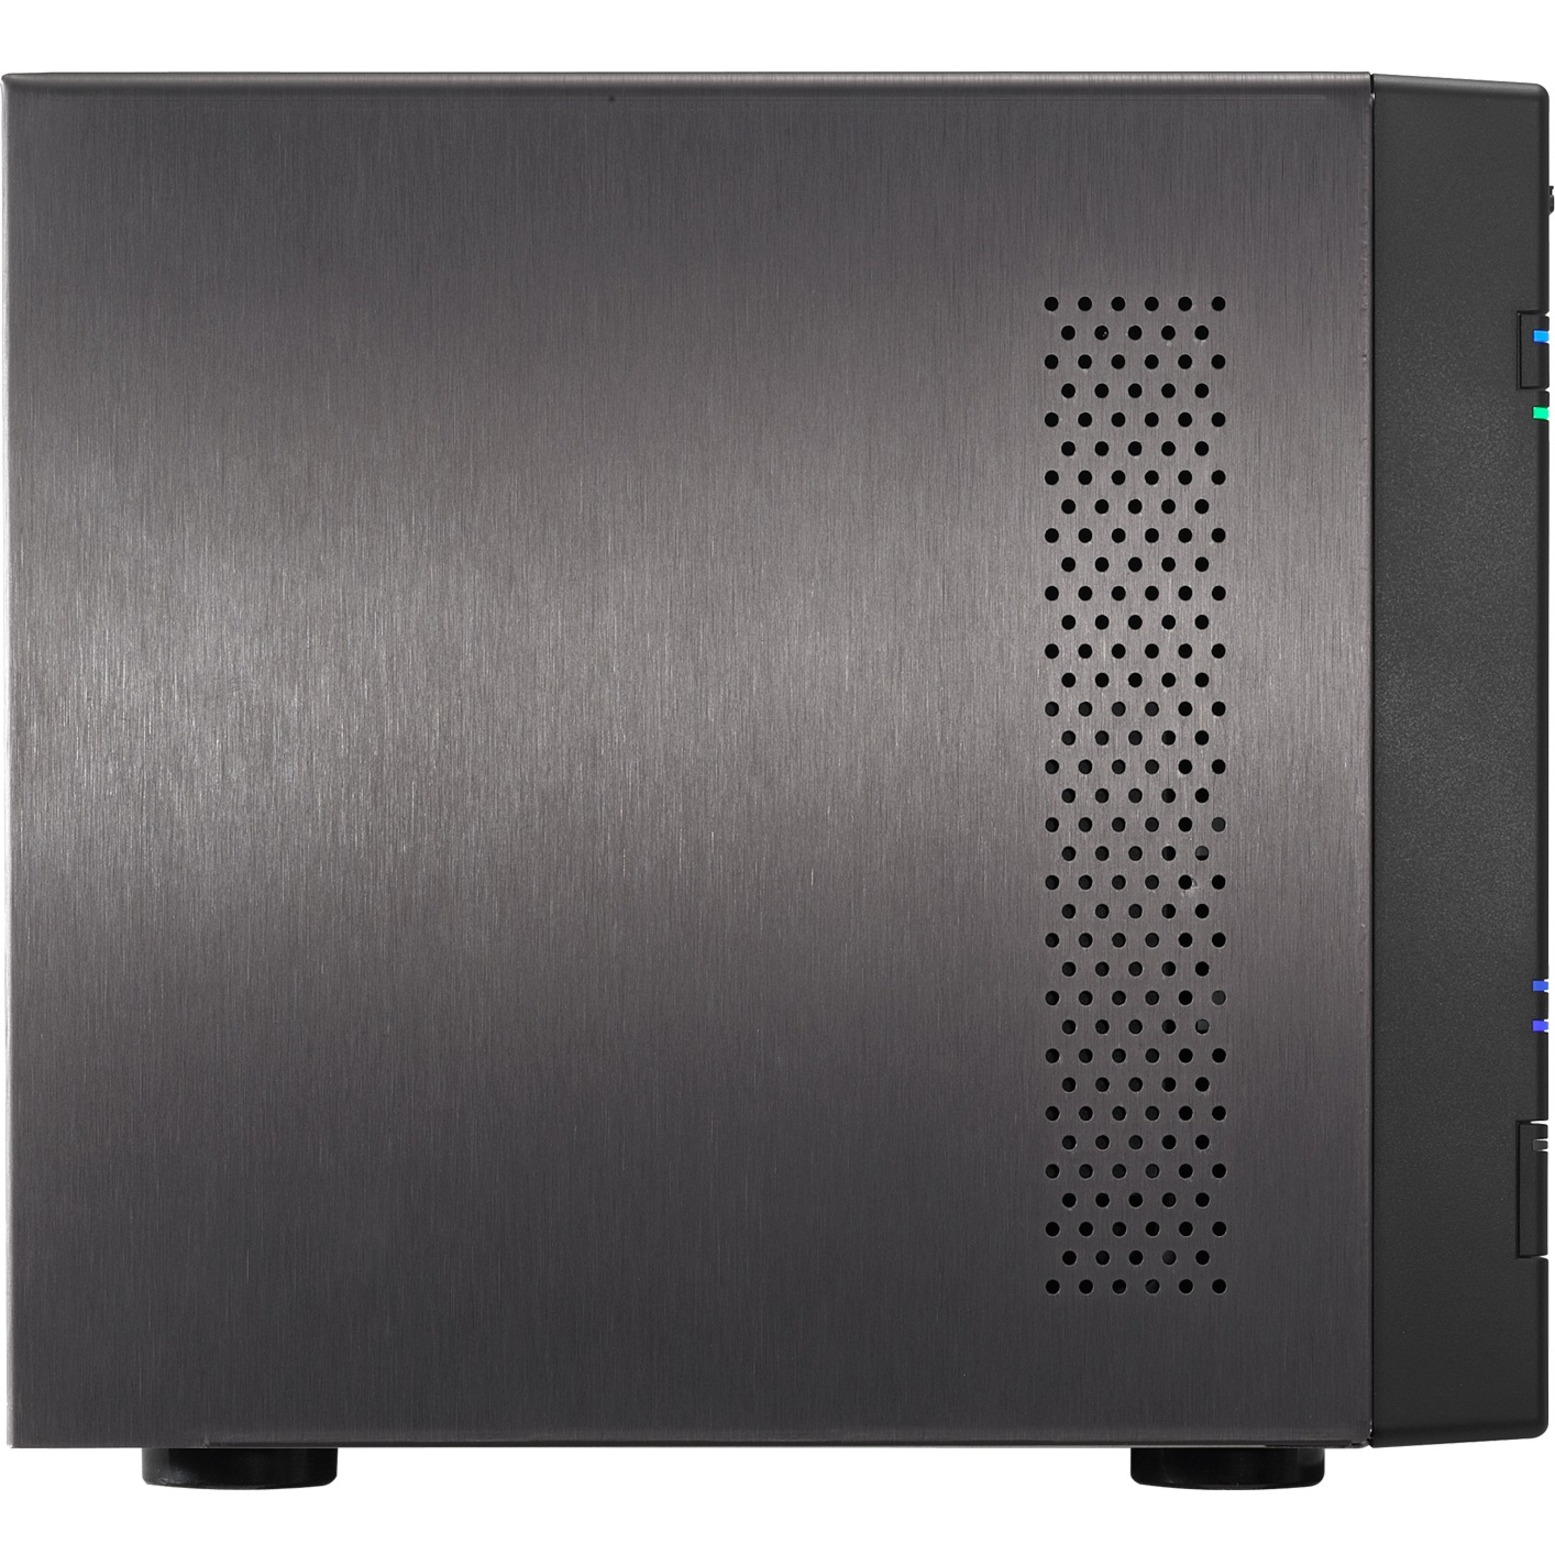 Asustor AS6210T 10-Bay NAS, Intel Celeron Quad-Core, 4 GB SO-DIMM DDR3L, GbE x 4, PCI-E (10GbE ready), USB 3.0 & eSATA, WoL, System Sleep Mode, AES-NI hardware encryption,with lockable tray - image 4 of 6